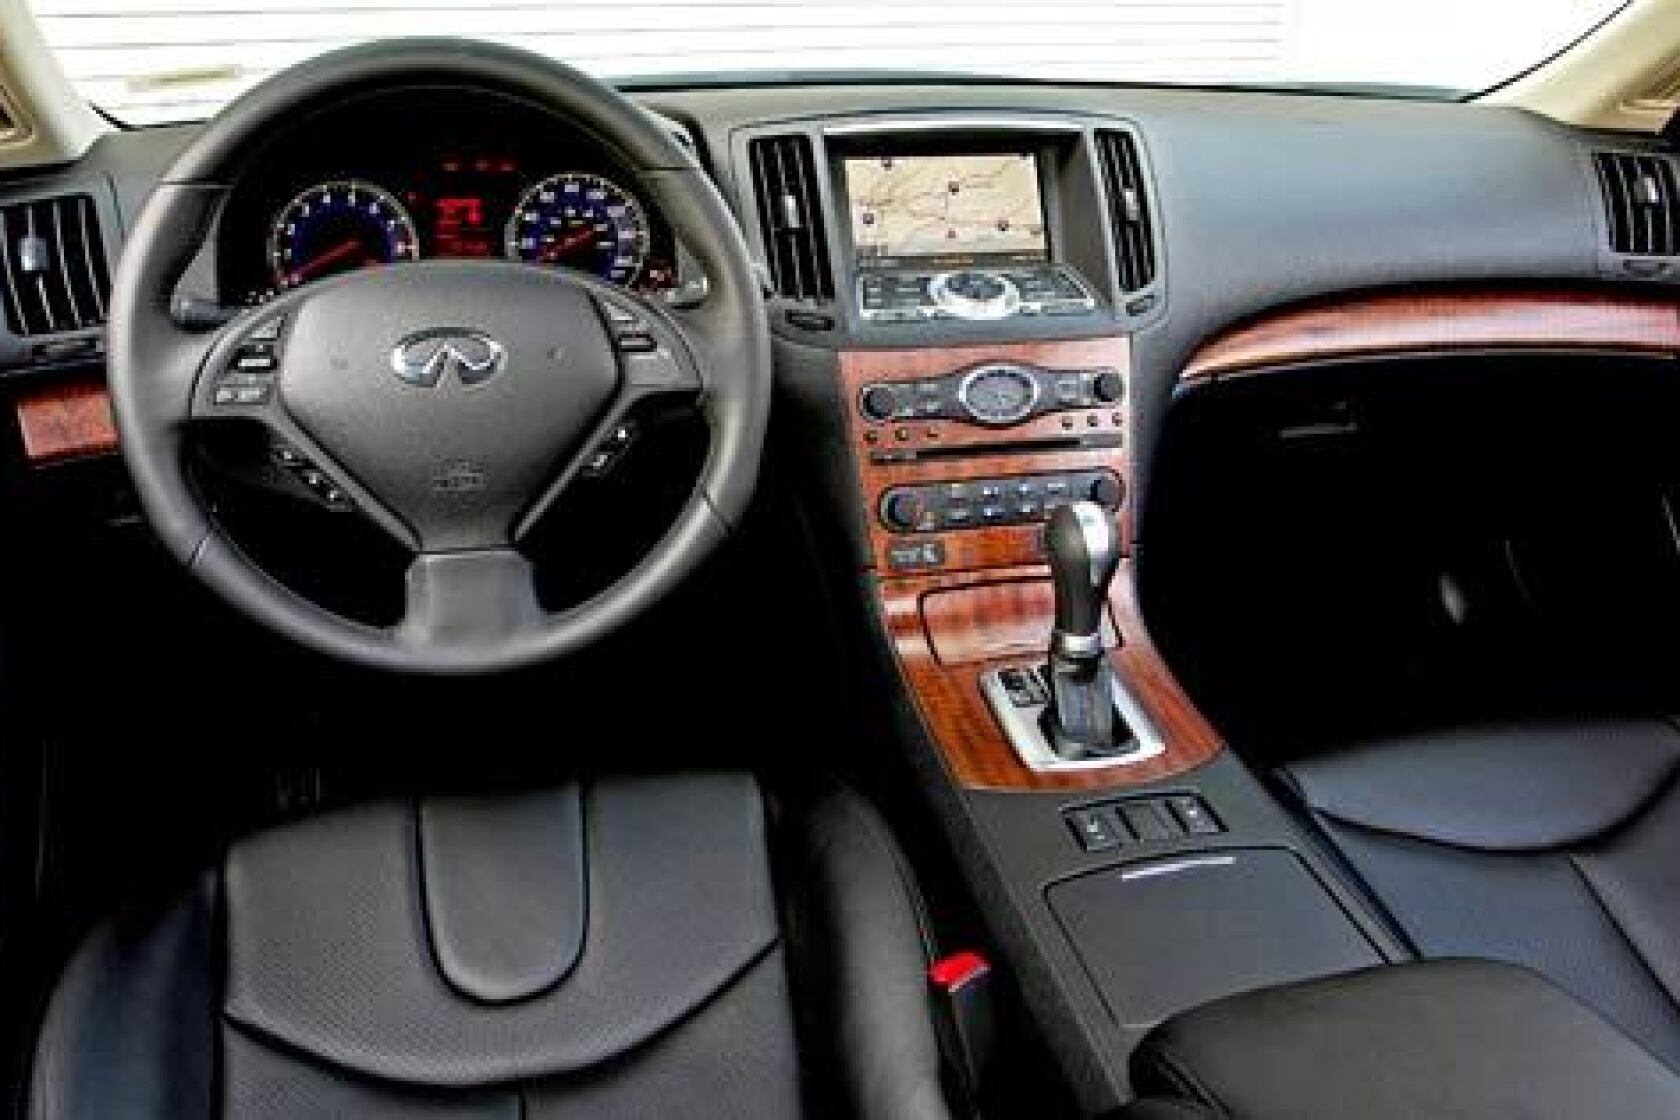 The 2008 Infiniti G37 Los Angeles Times